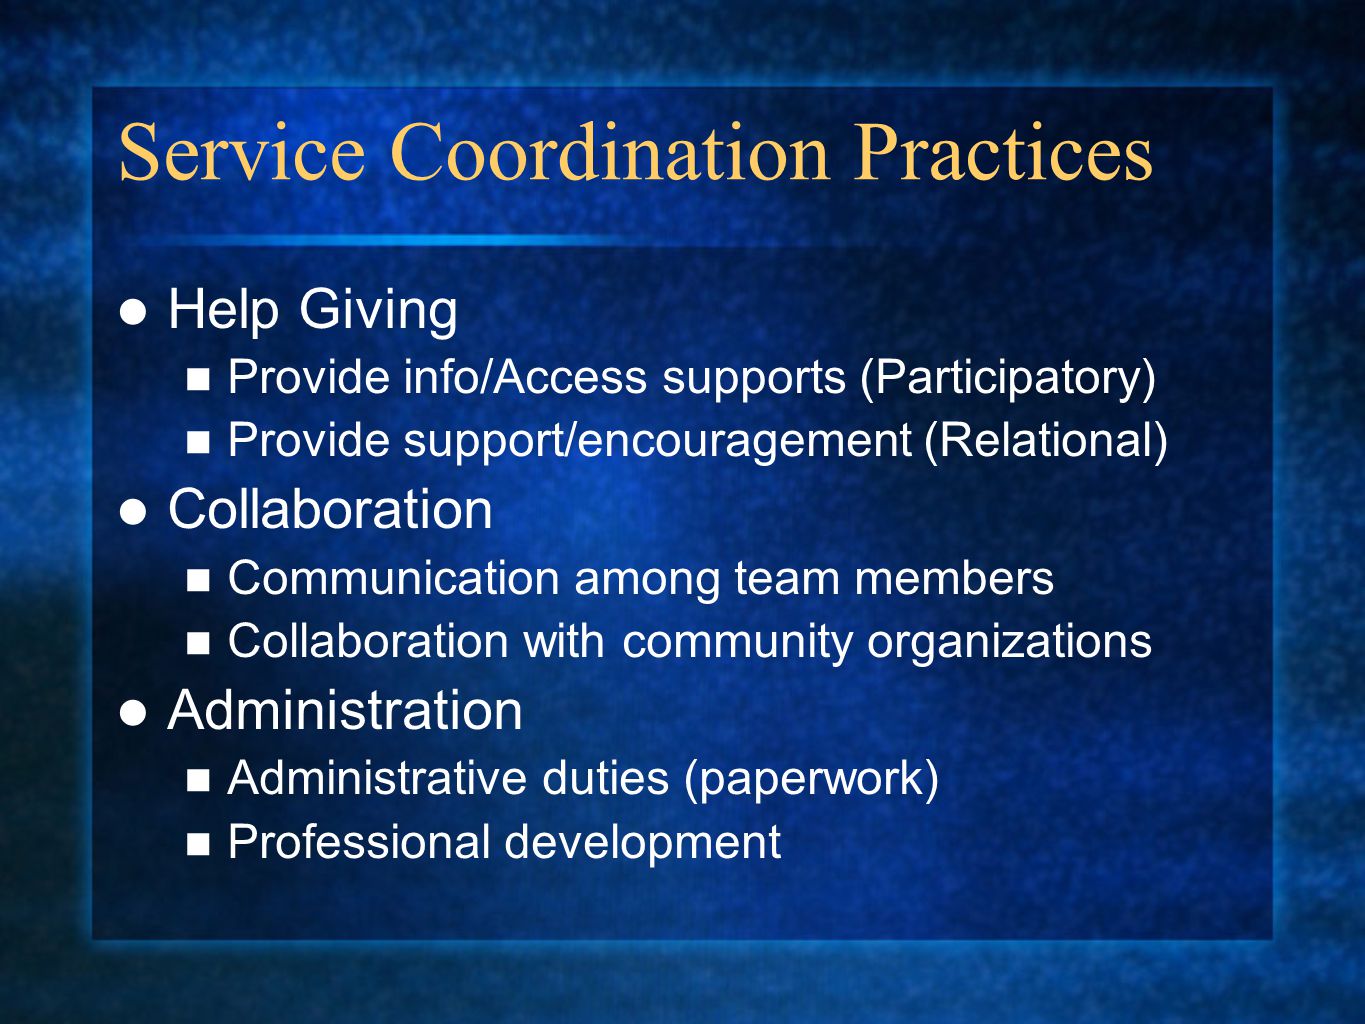 Service Coordination Practices Help Giving Provide info/Access supports (Participatory) Provide support/encouragement (Relational) Collaboration Communication among team members Collaboration with community organizations Administration Administrative duties (paperwork) Professional development